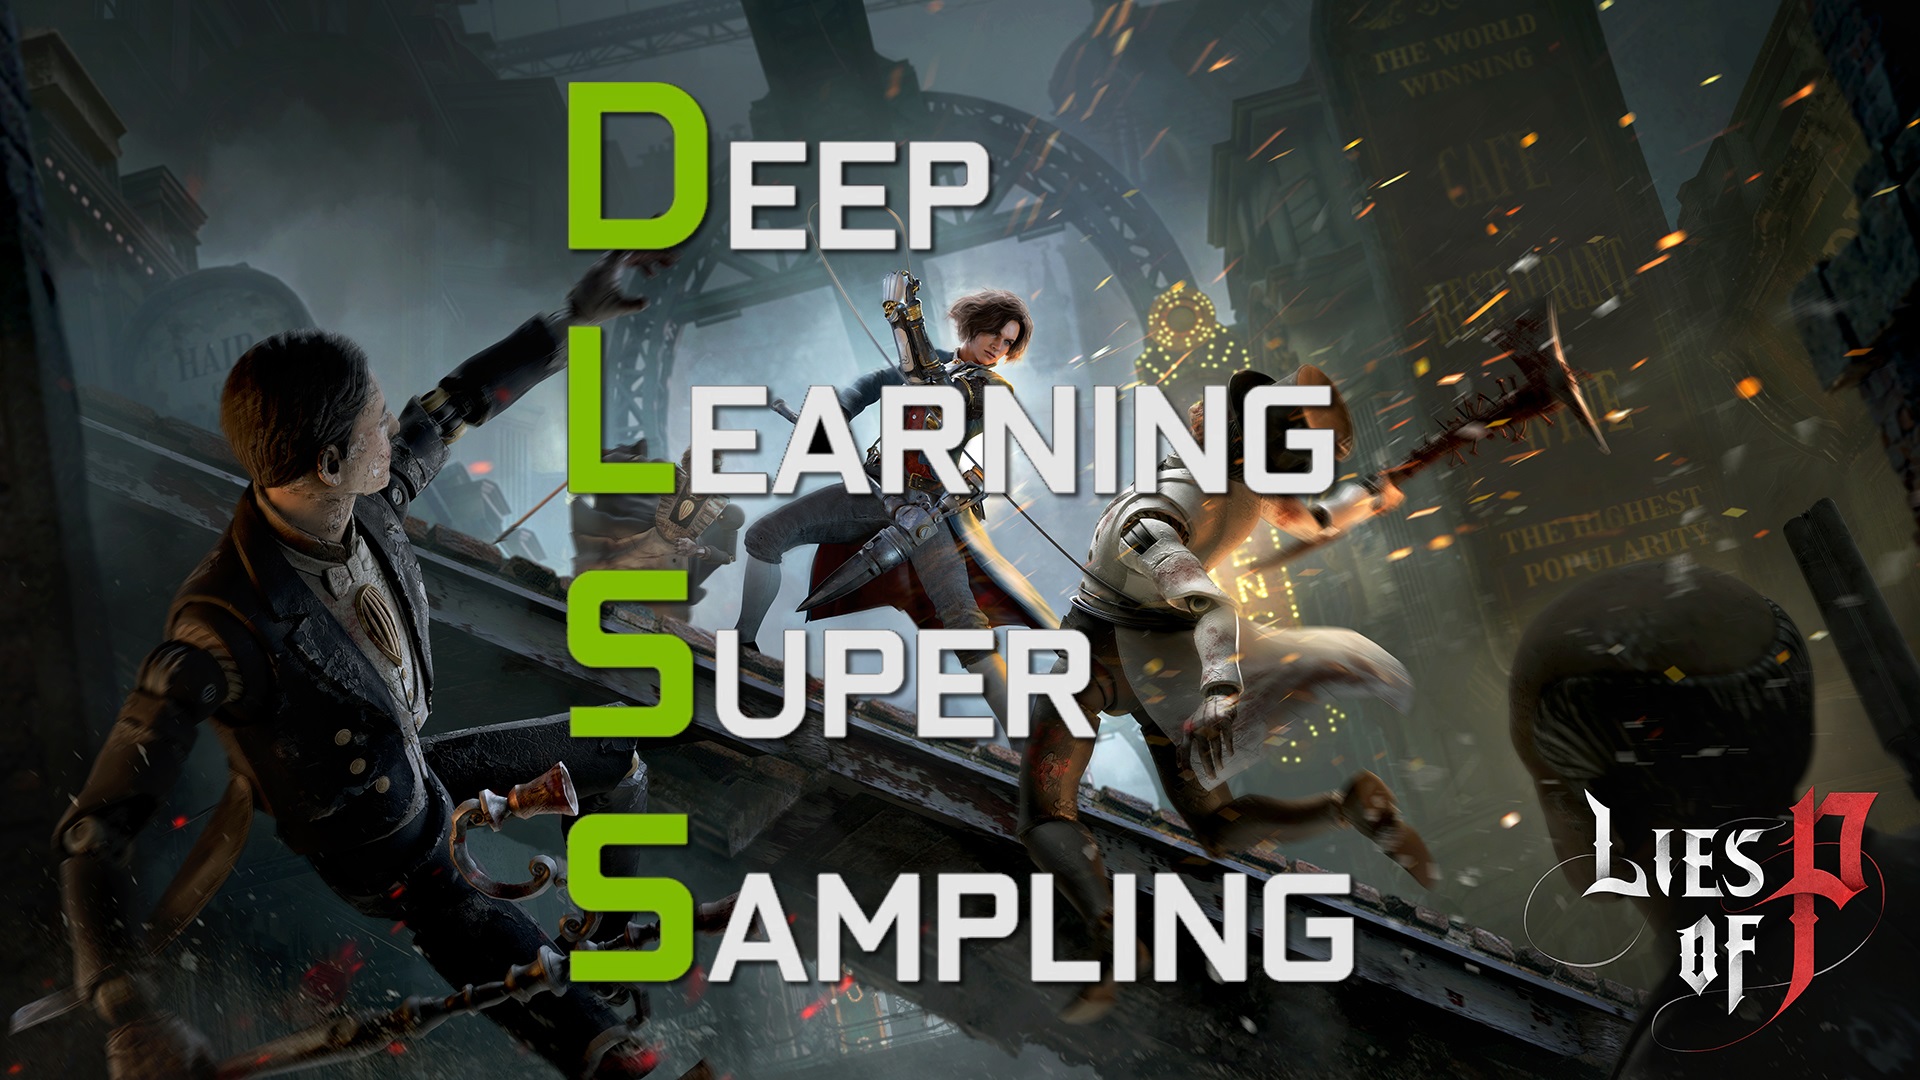 Use DLSS to Make Your PC Games Run Better